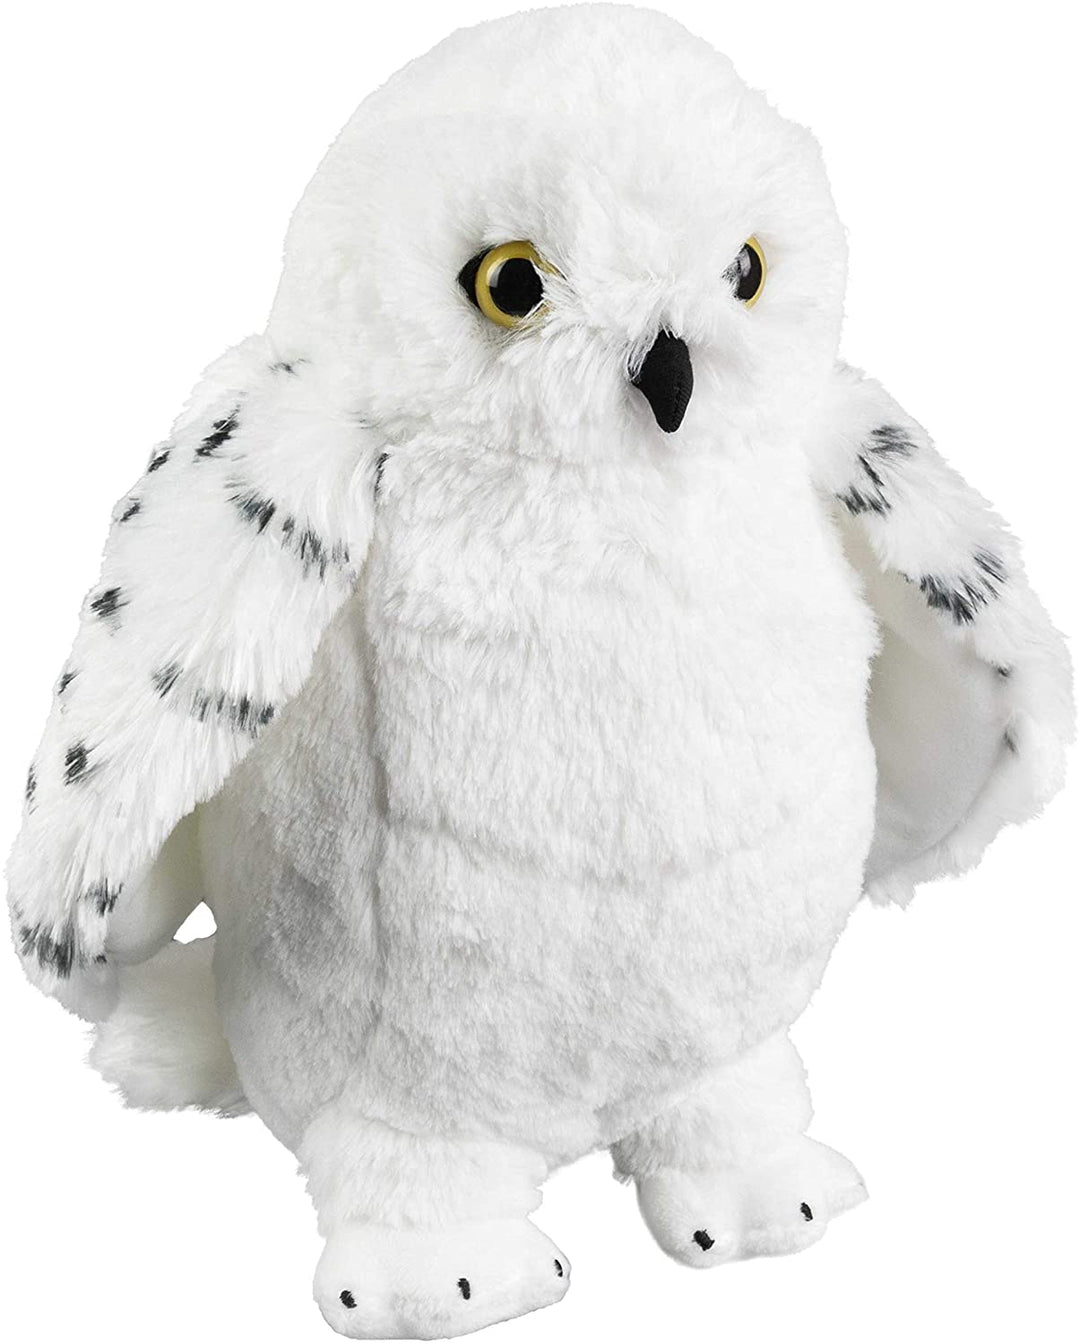 The Noble Collection Harry Potter Hedwig Plush - 11in (28cm) Soft Plush Snowy Owl - Officially Licensed Film Set Movie Props Gifts Merchandise